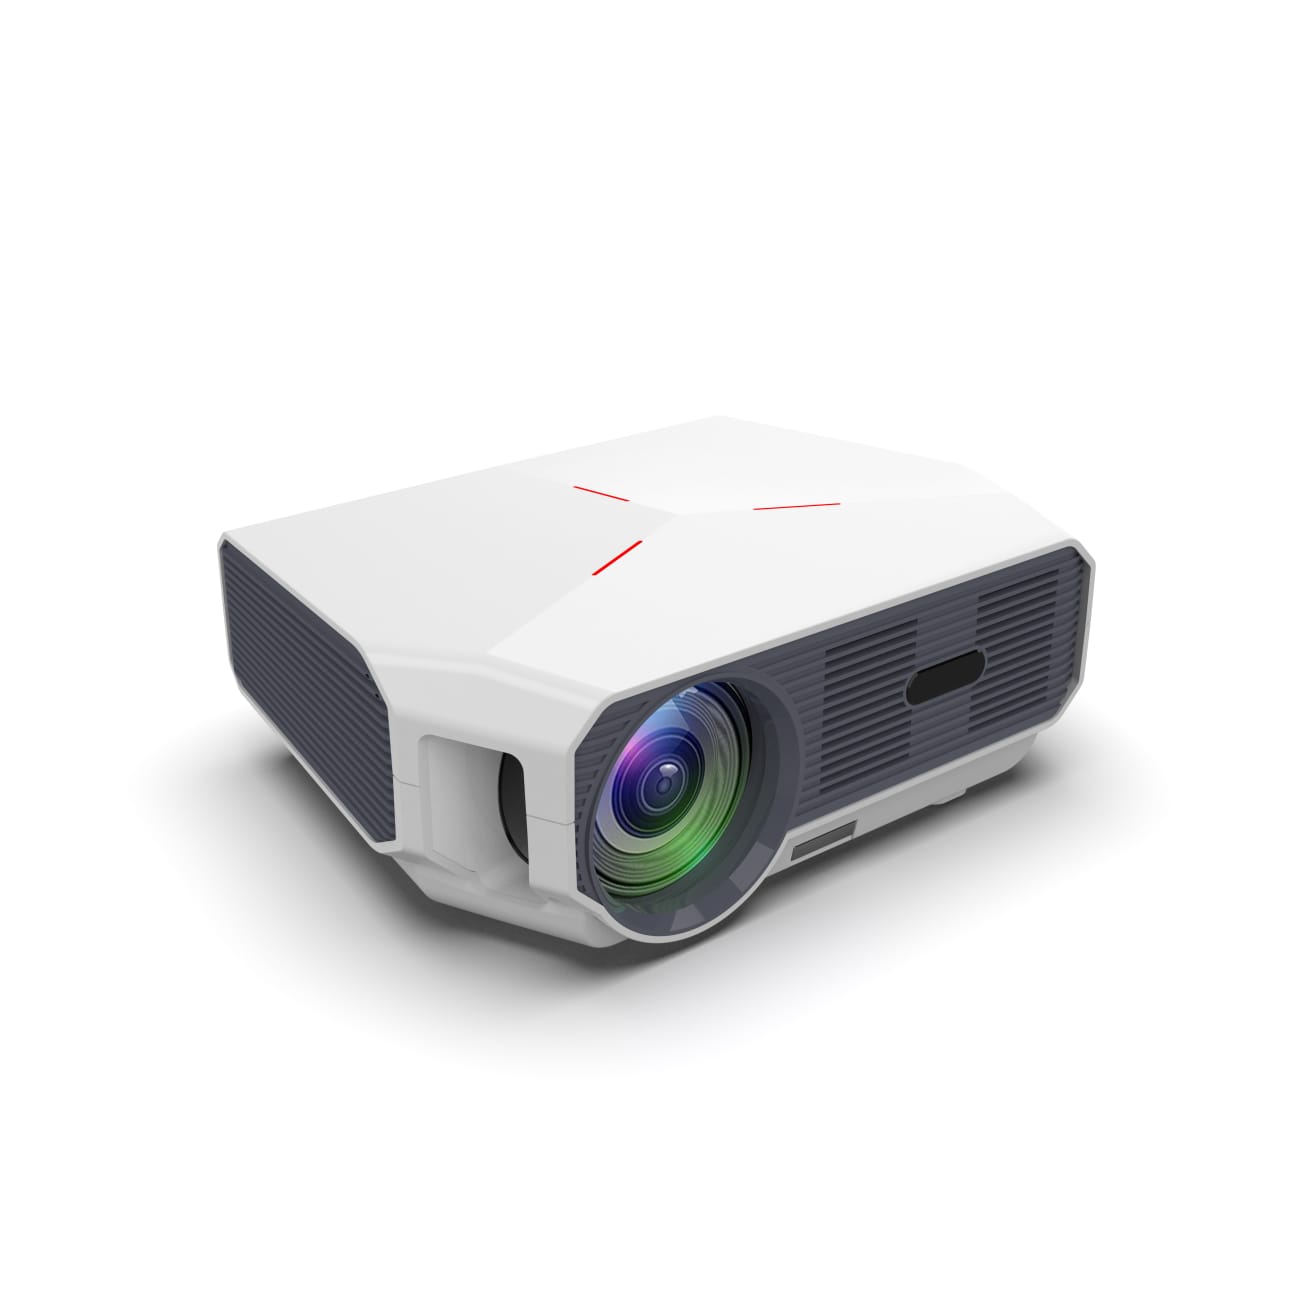 ePP-4300PRO portable Projector, NATIVE RESOLUTION 1920*1080 SUPPORT 4K RESOLUTION can connect to mobile phone, Android OS, or iOS, Window, to your PC, laptop, Tablet, more.